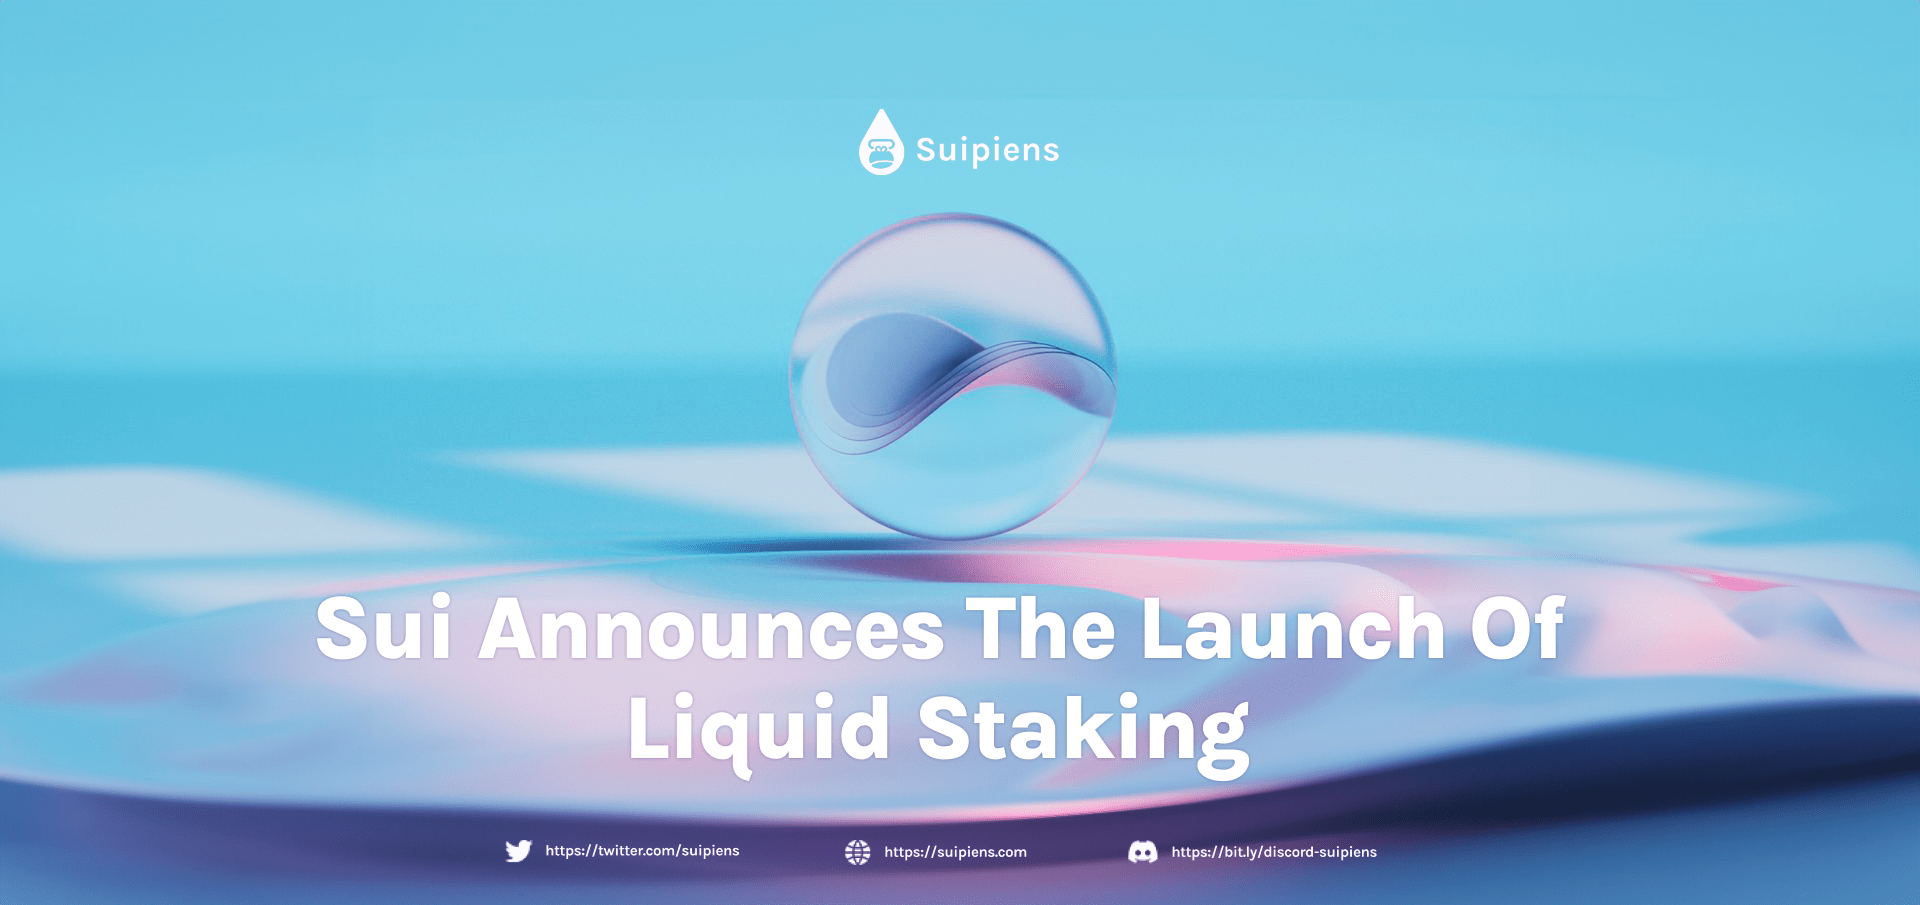 Sui Announces the Launch of Liquid Staking